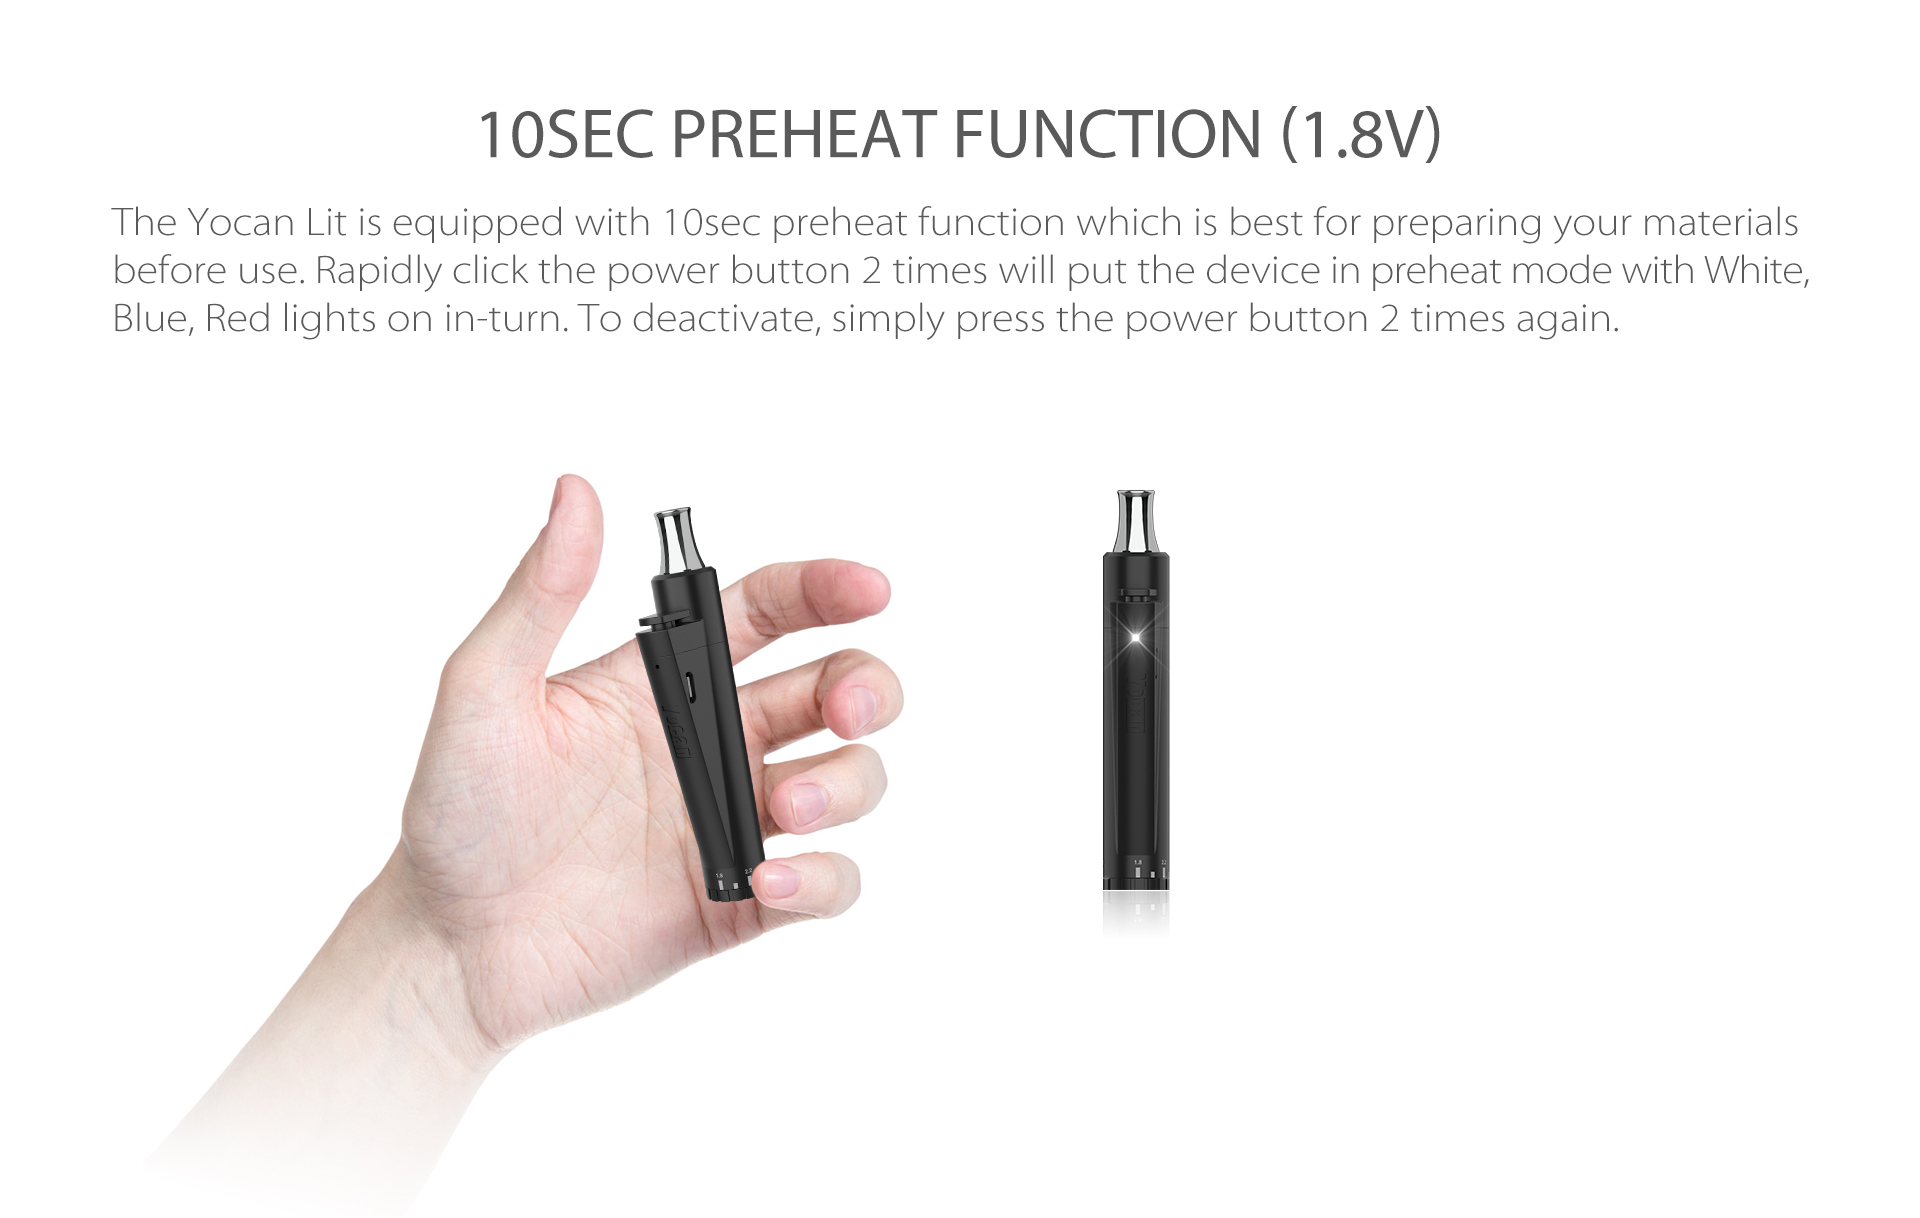 Yocan Lit Twist Concentrate Vaporizer featured 10Sec Preheat Function